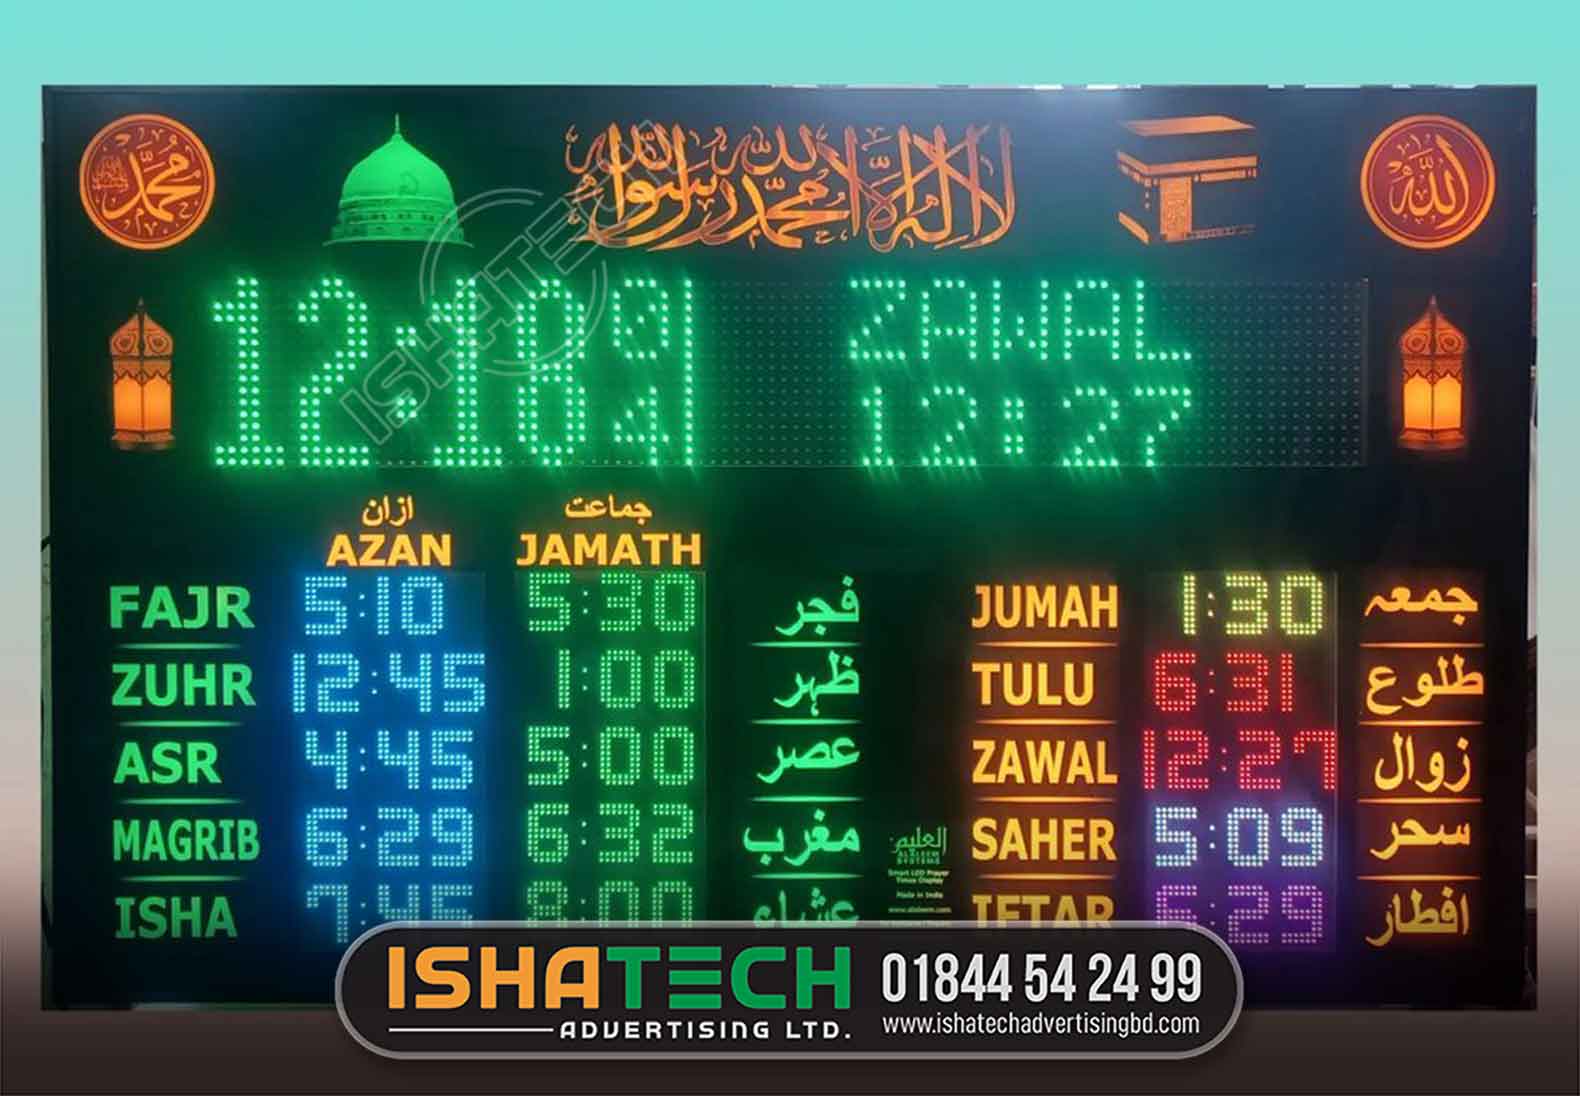 mosquee namaz time digital led wall clock making and supplier shop in Dhaka, Bangladesh